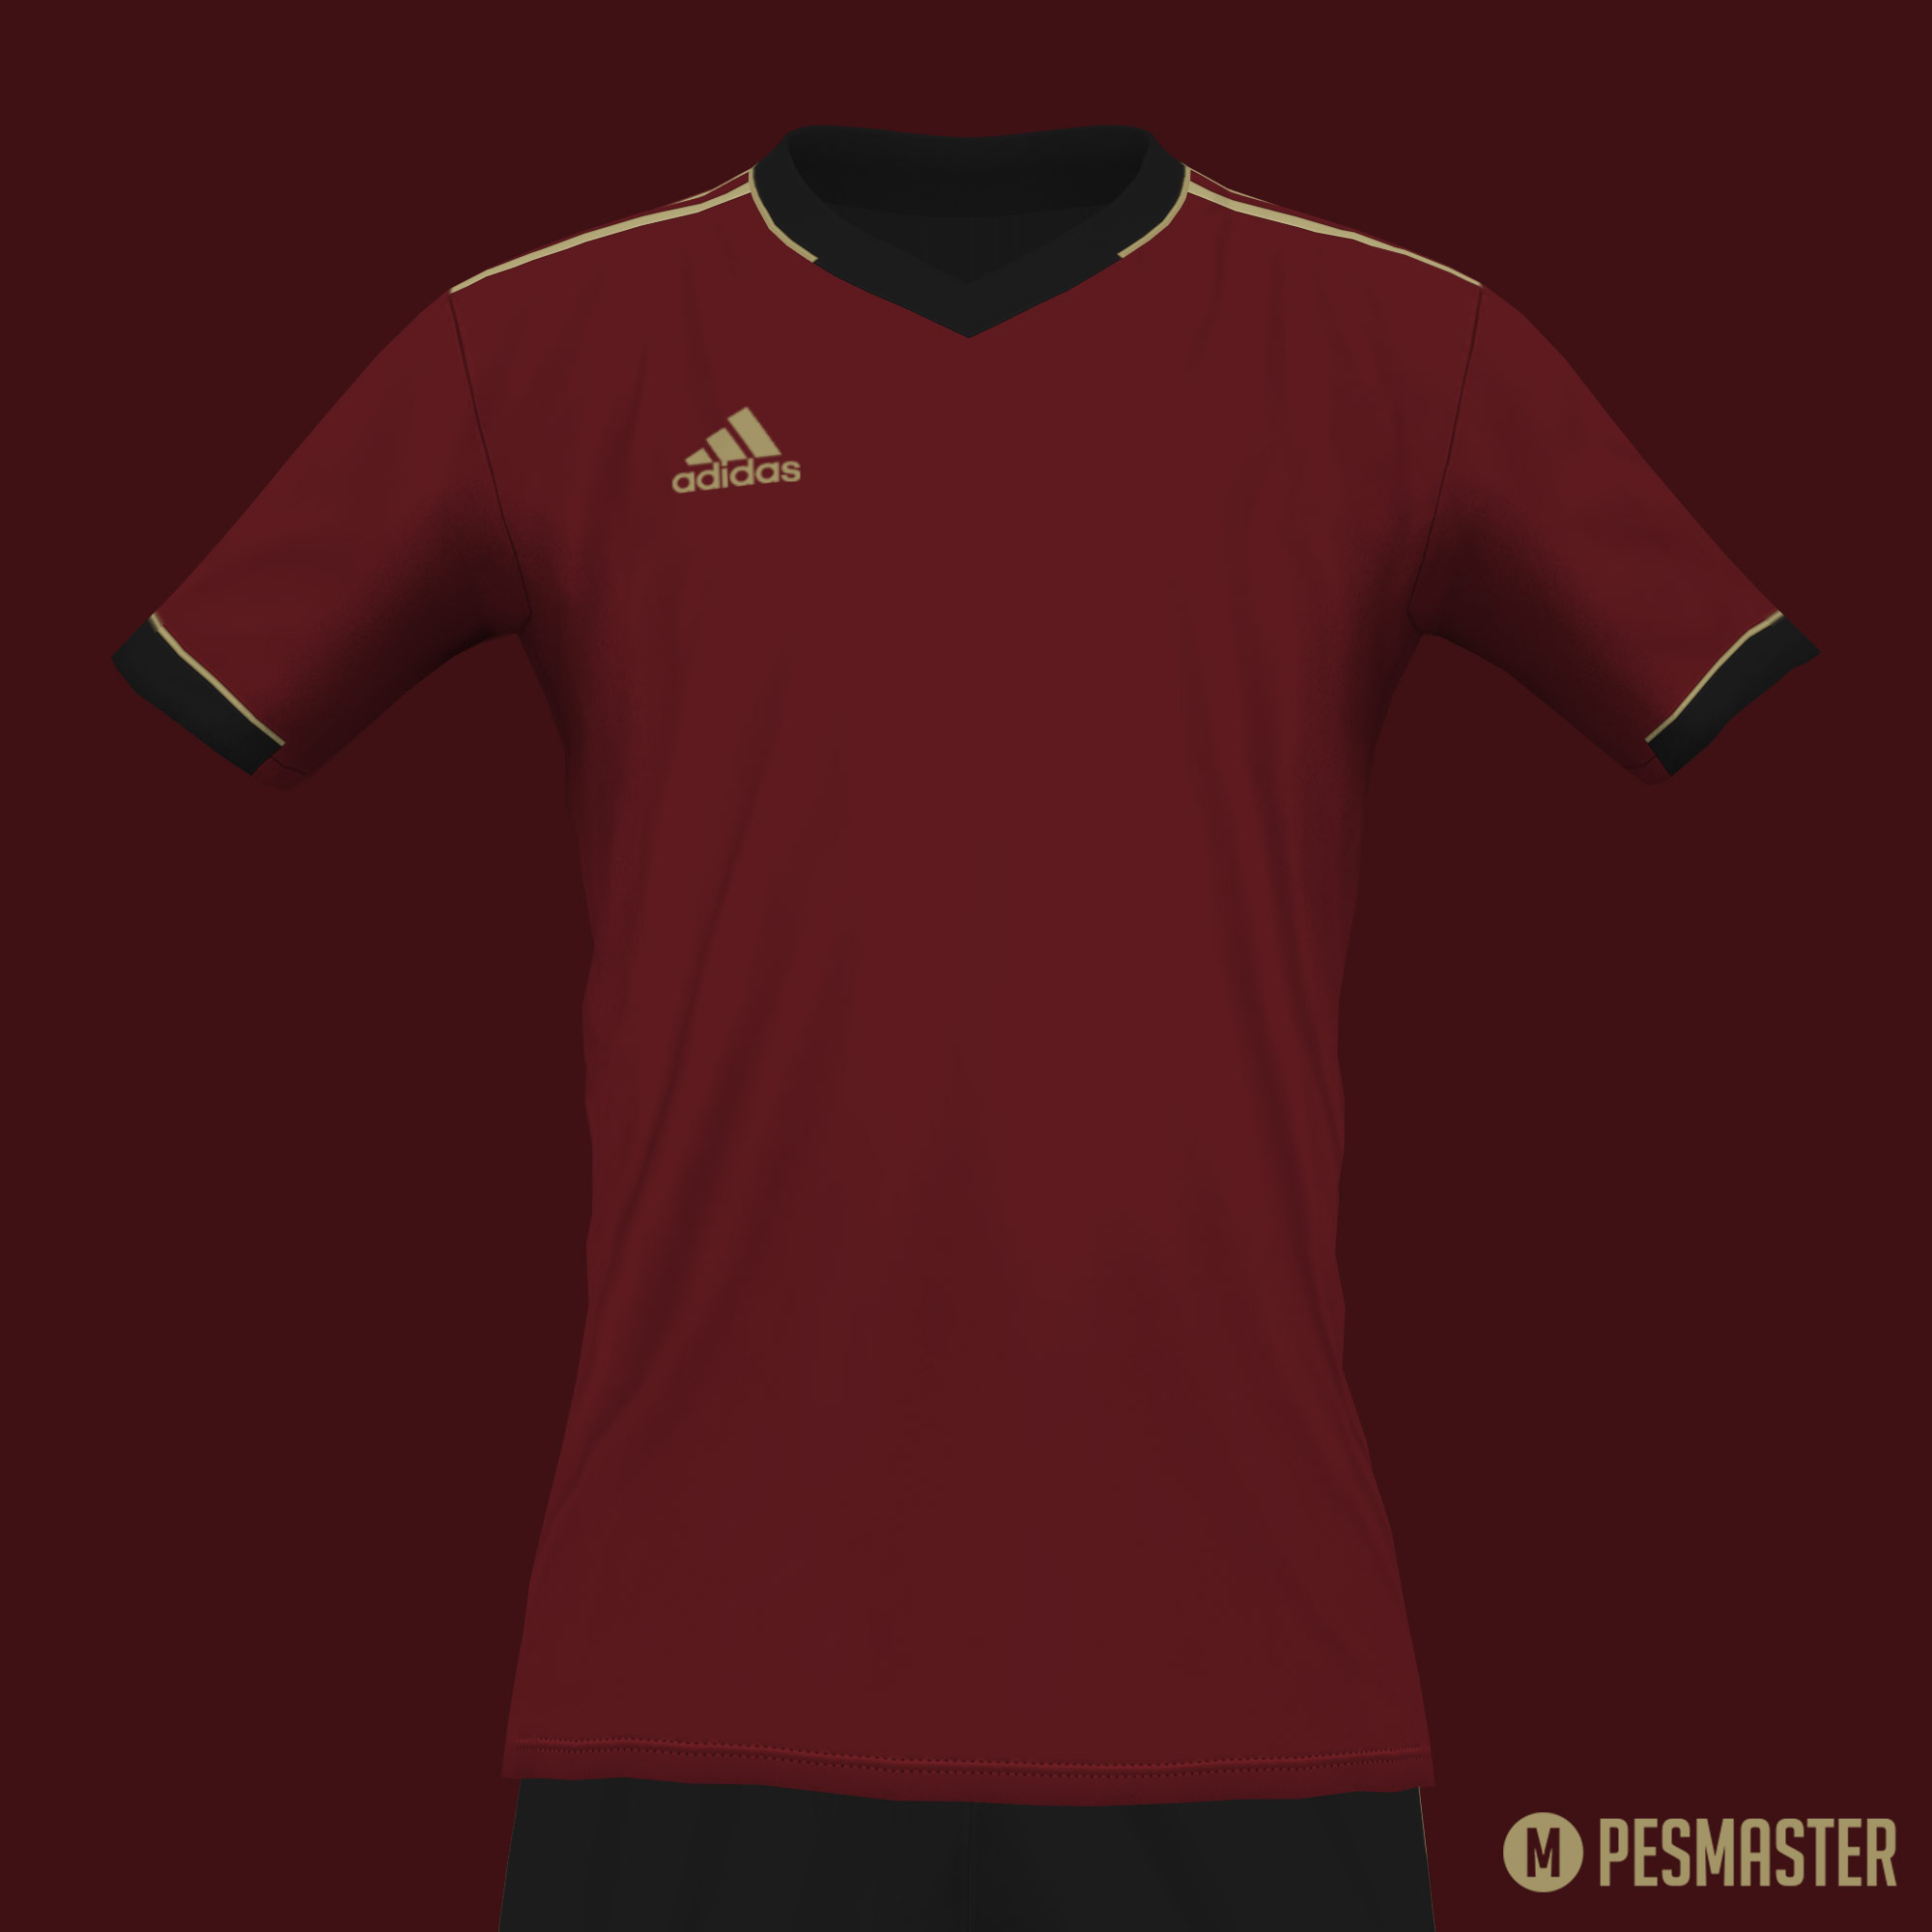 PES Twitter: "🔥 Preview: Adidas V template https://t.co/qjdnpiE17M" / X